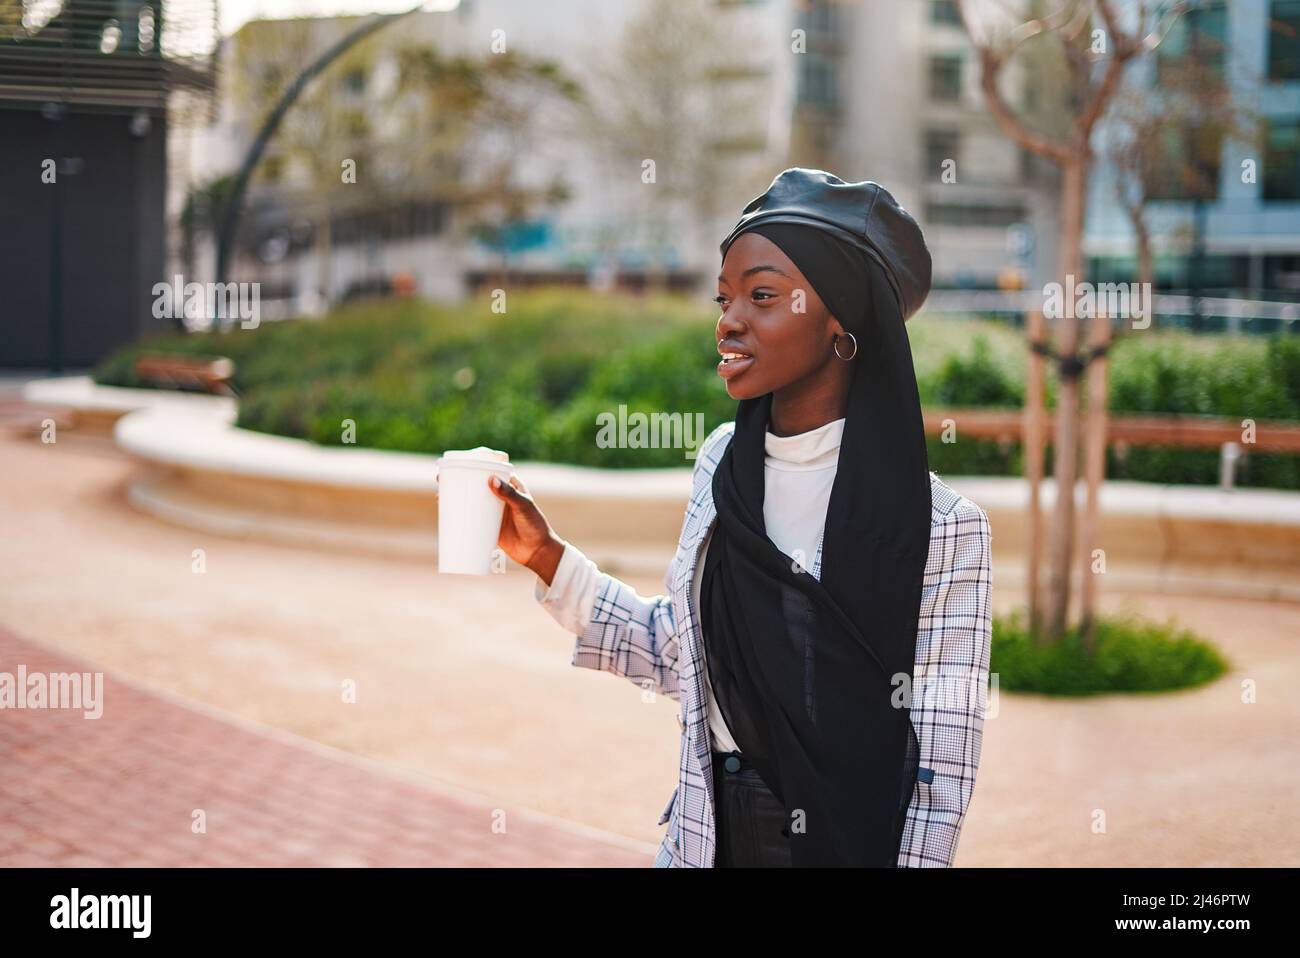 Happy African American woman in smart casual clothing and Muslim headscarf carrying takeaway coffee in public city park Stock Photo